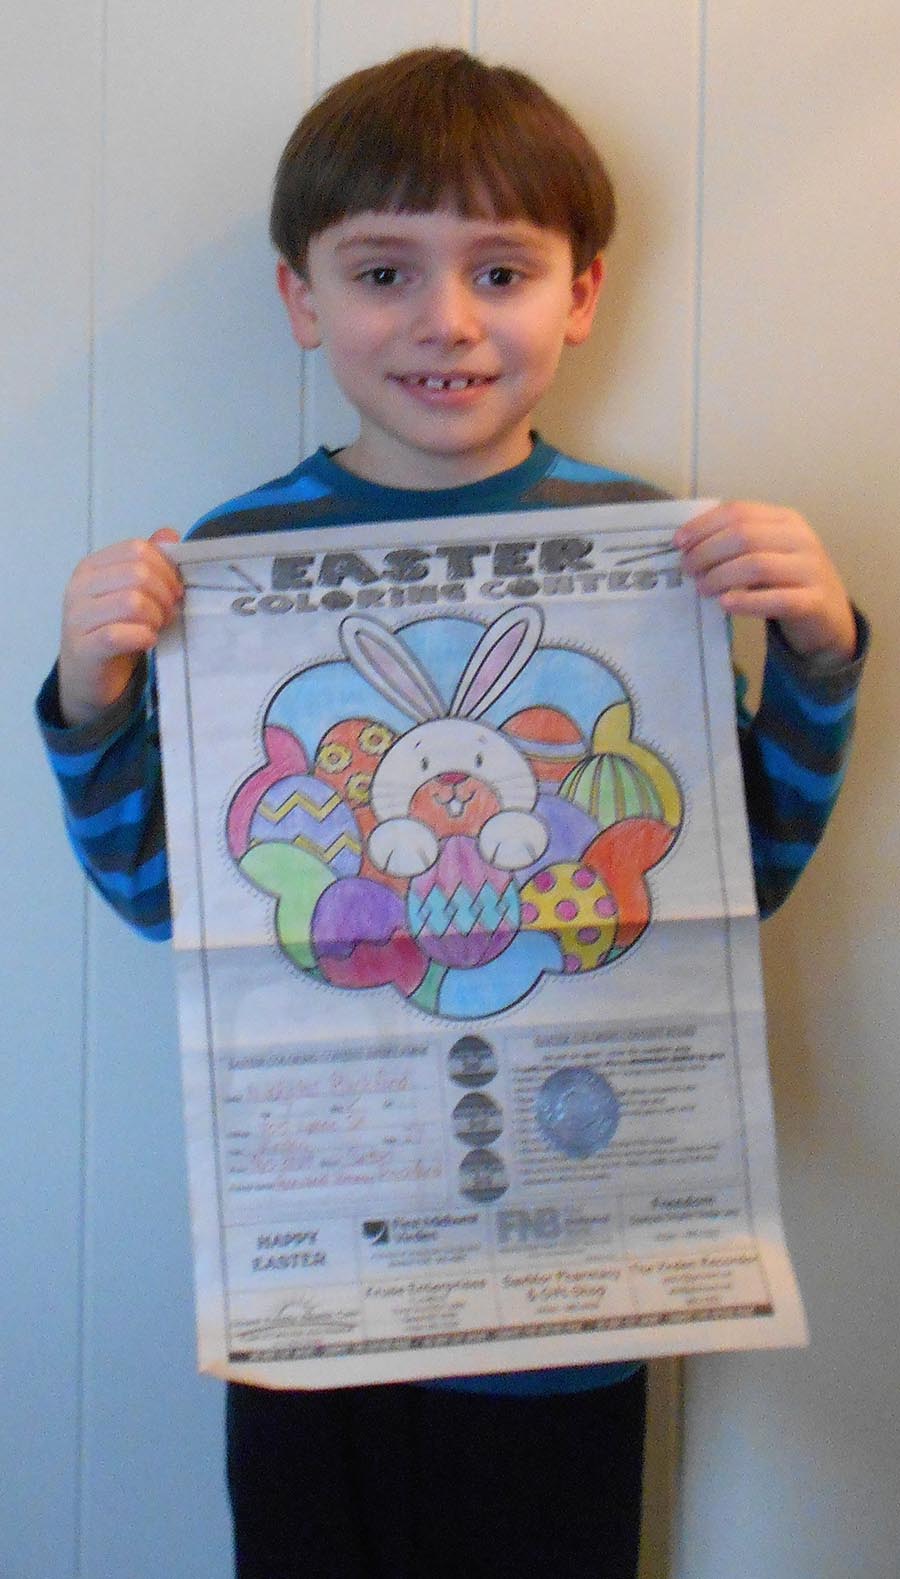 Nicholas Wins 2nd Place in Coloring Contest